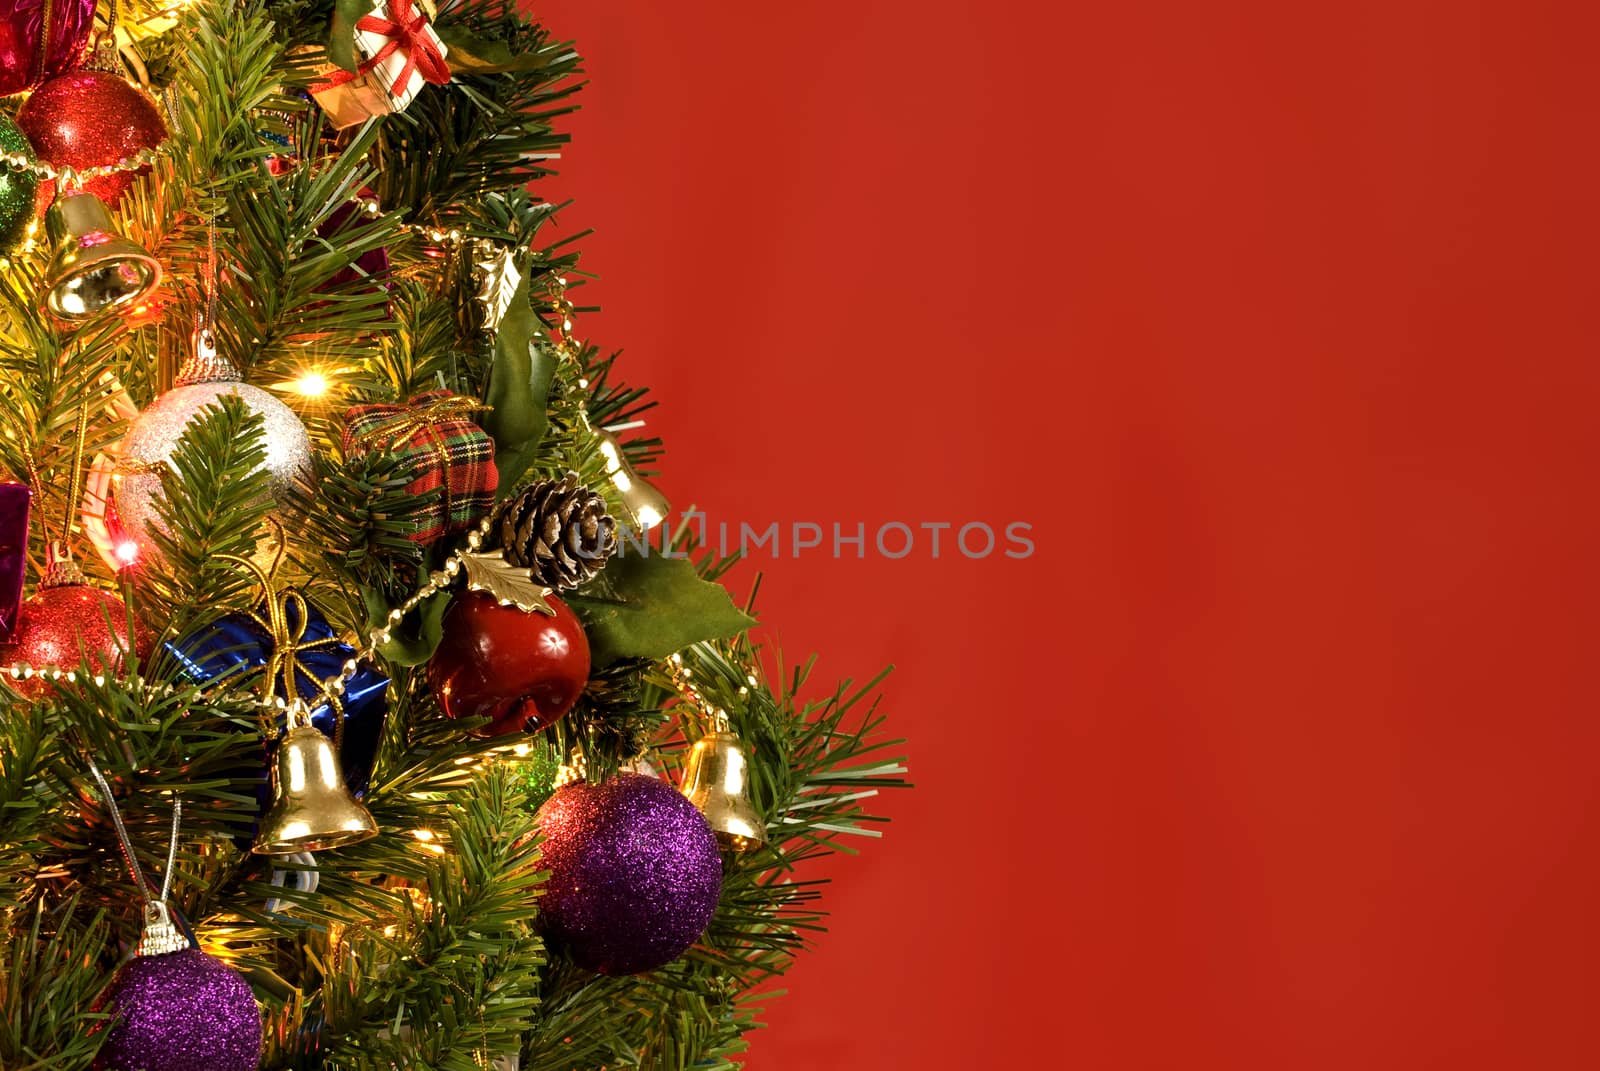 Beautiful Christmas Tree On Red Background by stockbuster1